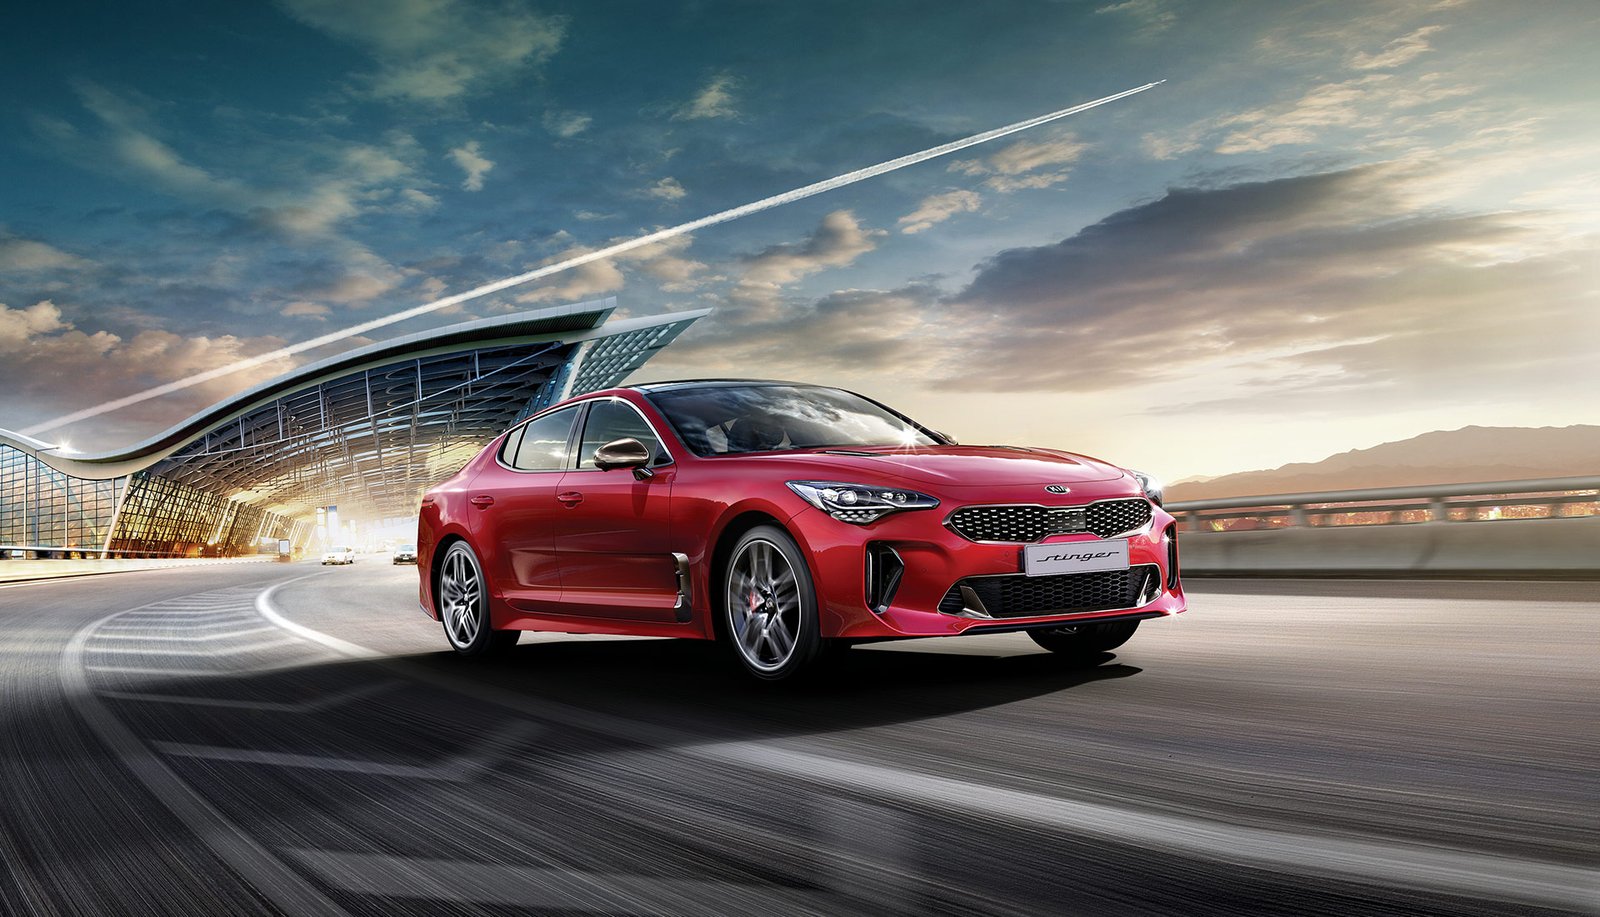 kia stinger 2020 twin turbo beautiful car I am going to buy one for sure in the near future